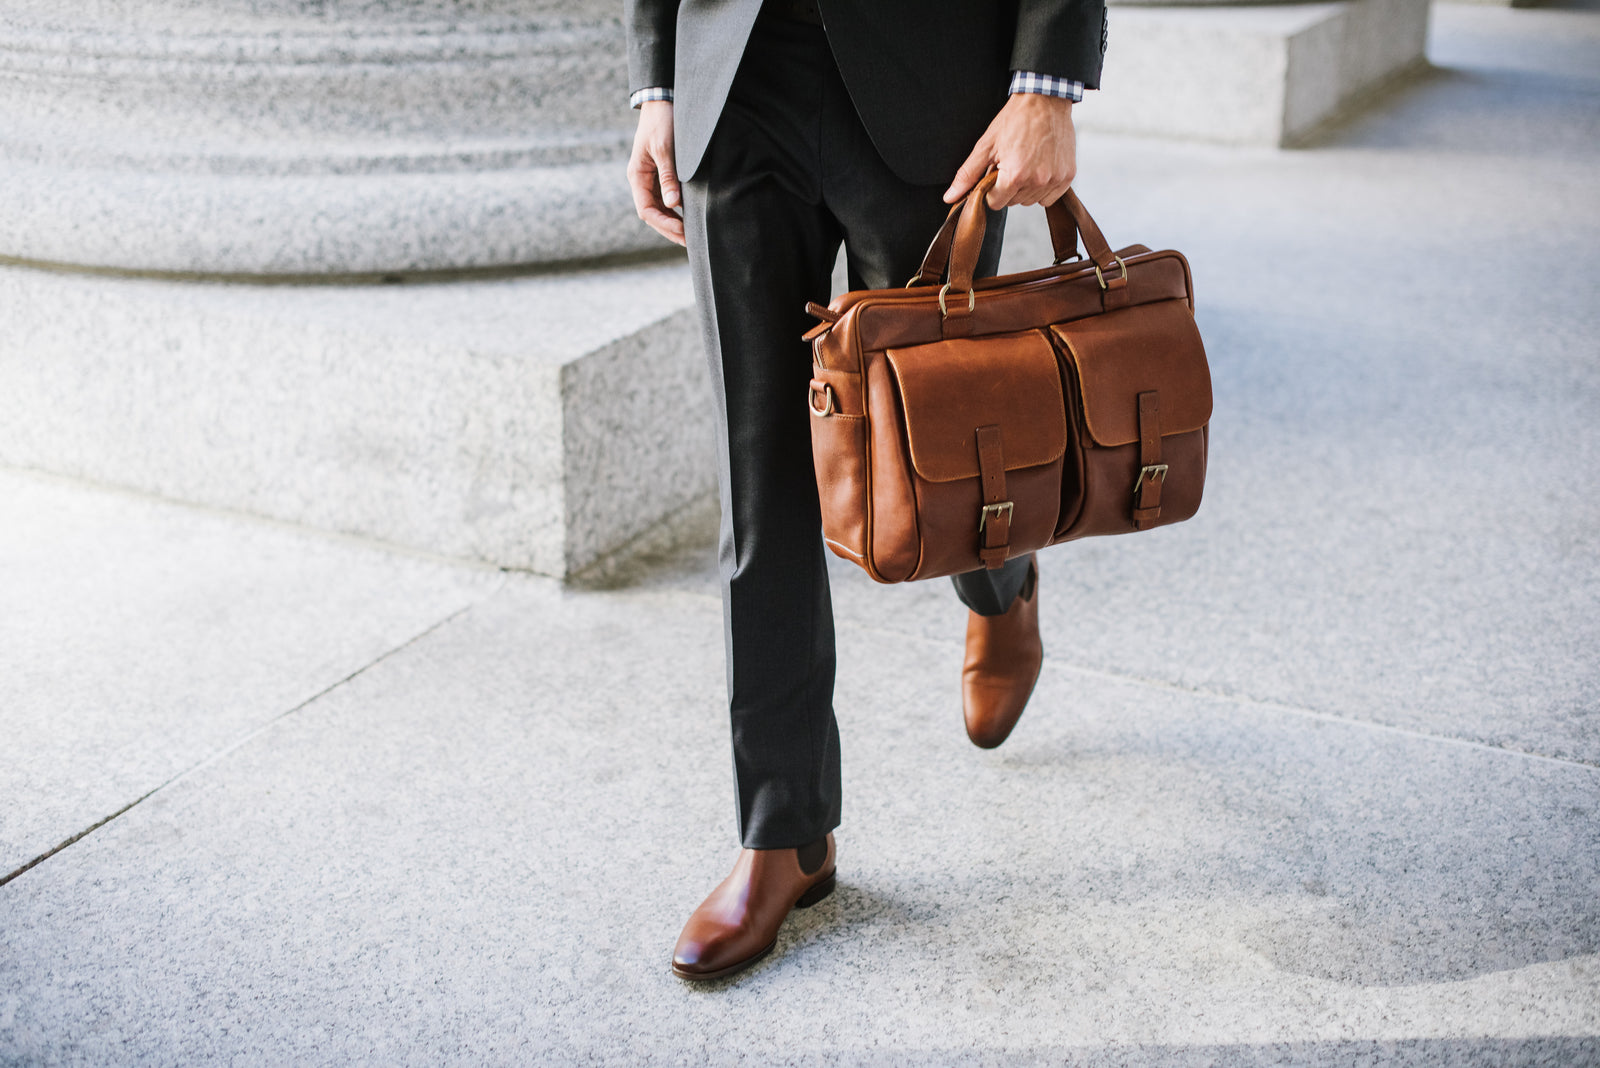 The Barton By Korchmar - Full Grain Leather Laptop Briefcase